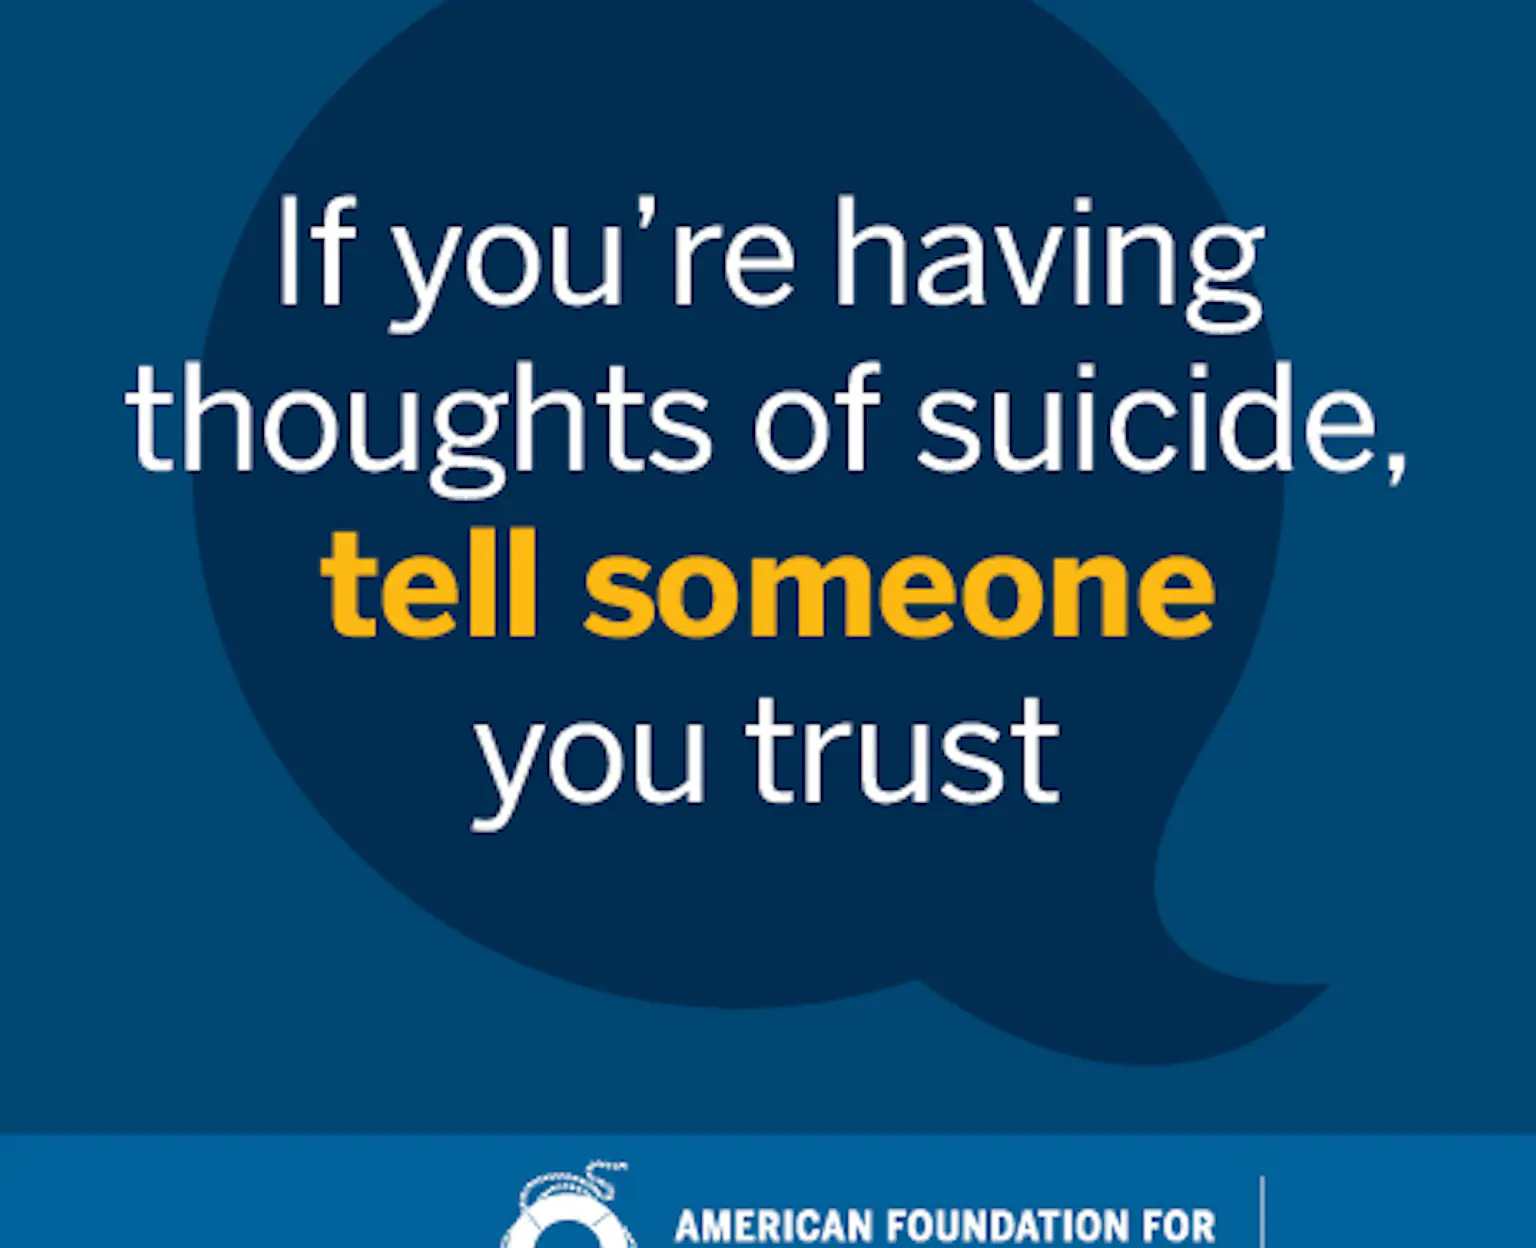 If you're having thoughts of suicide, tell someone you trust